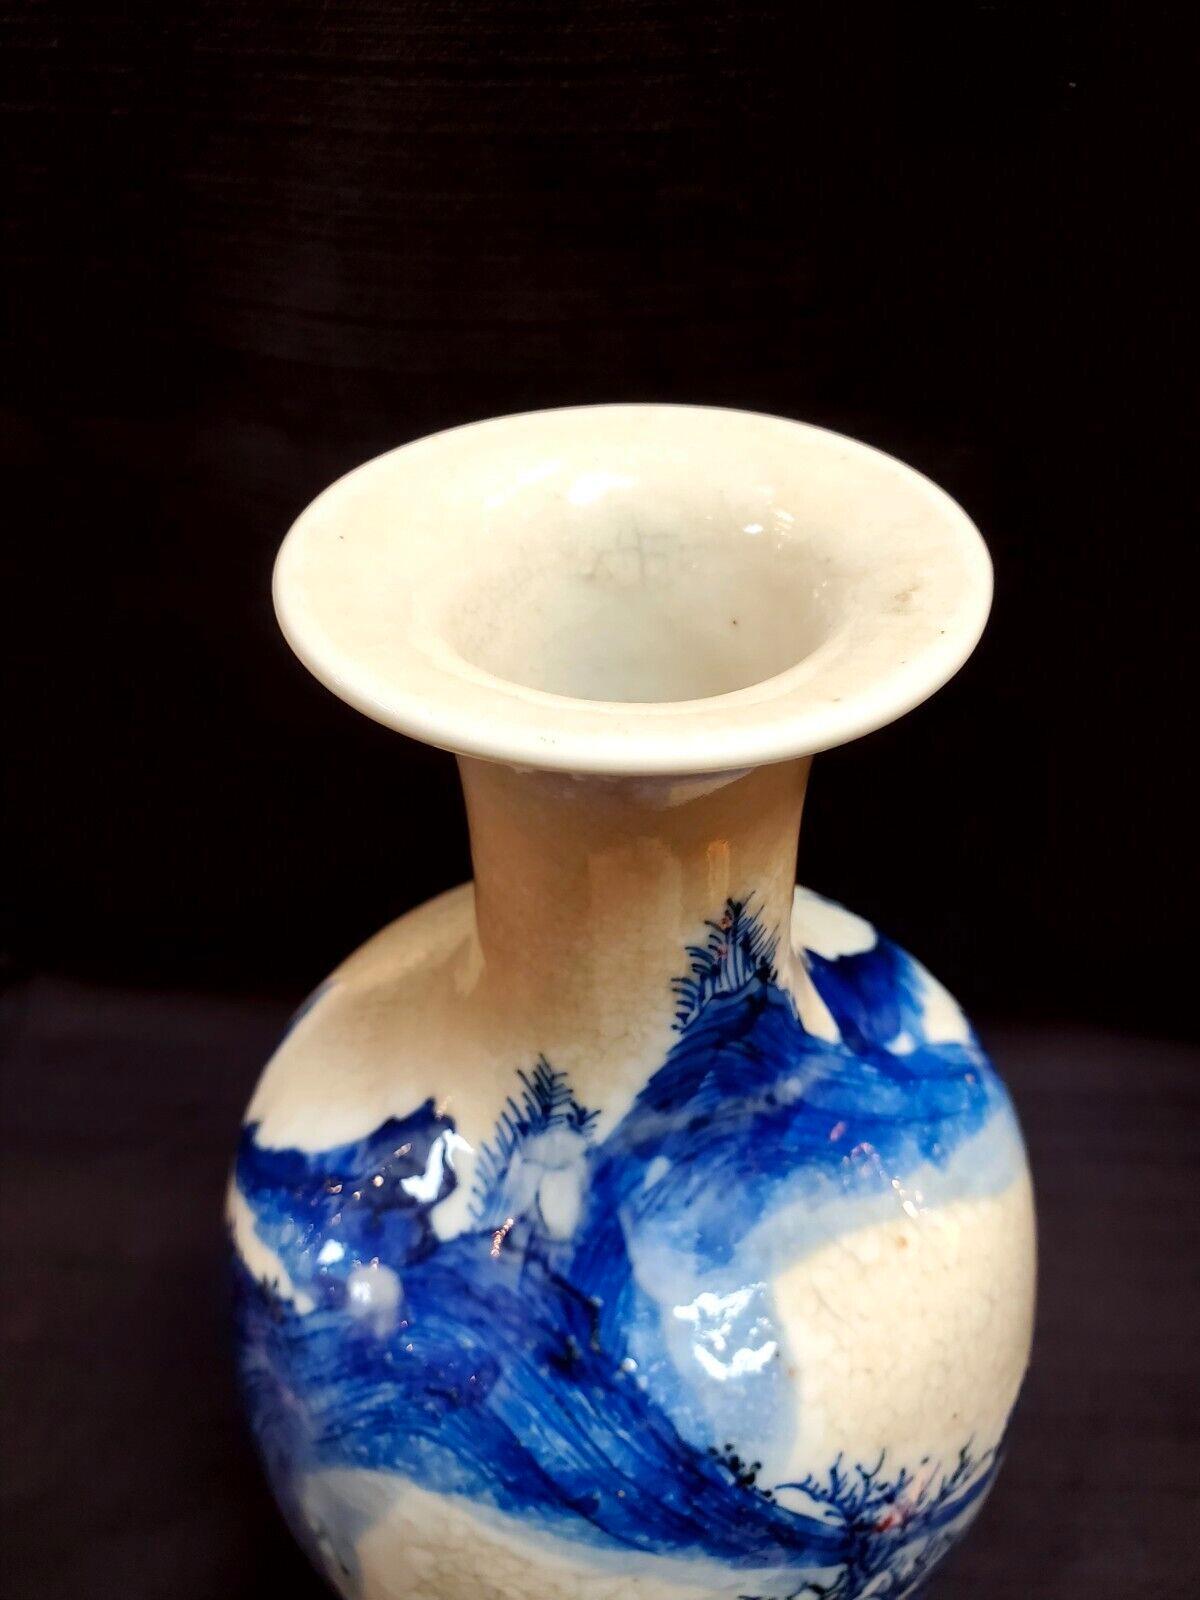 Qing, Chinese antique mid-period Ge Glazed blue and white landscape painting porcelain vase/ ??????????? (??)
Condition: Shows normal signs of wear and use, No damage or crack. 
Approximate size: H:30cm, W:4.5 inch. Please refer to the size in the